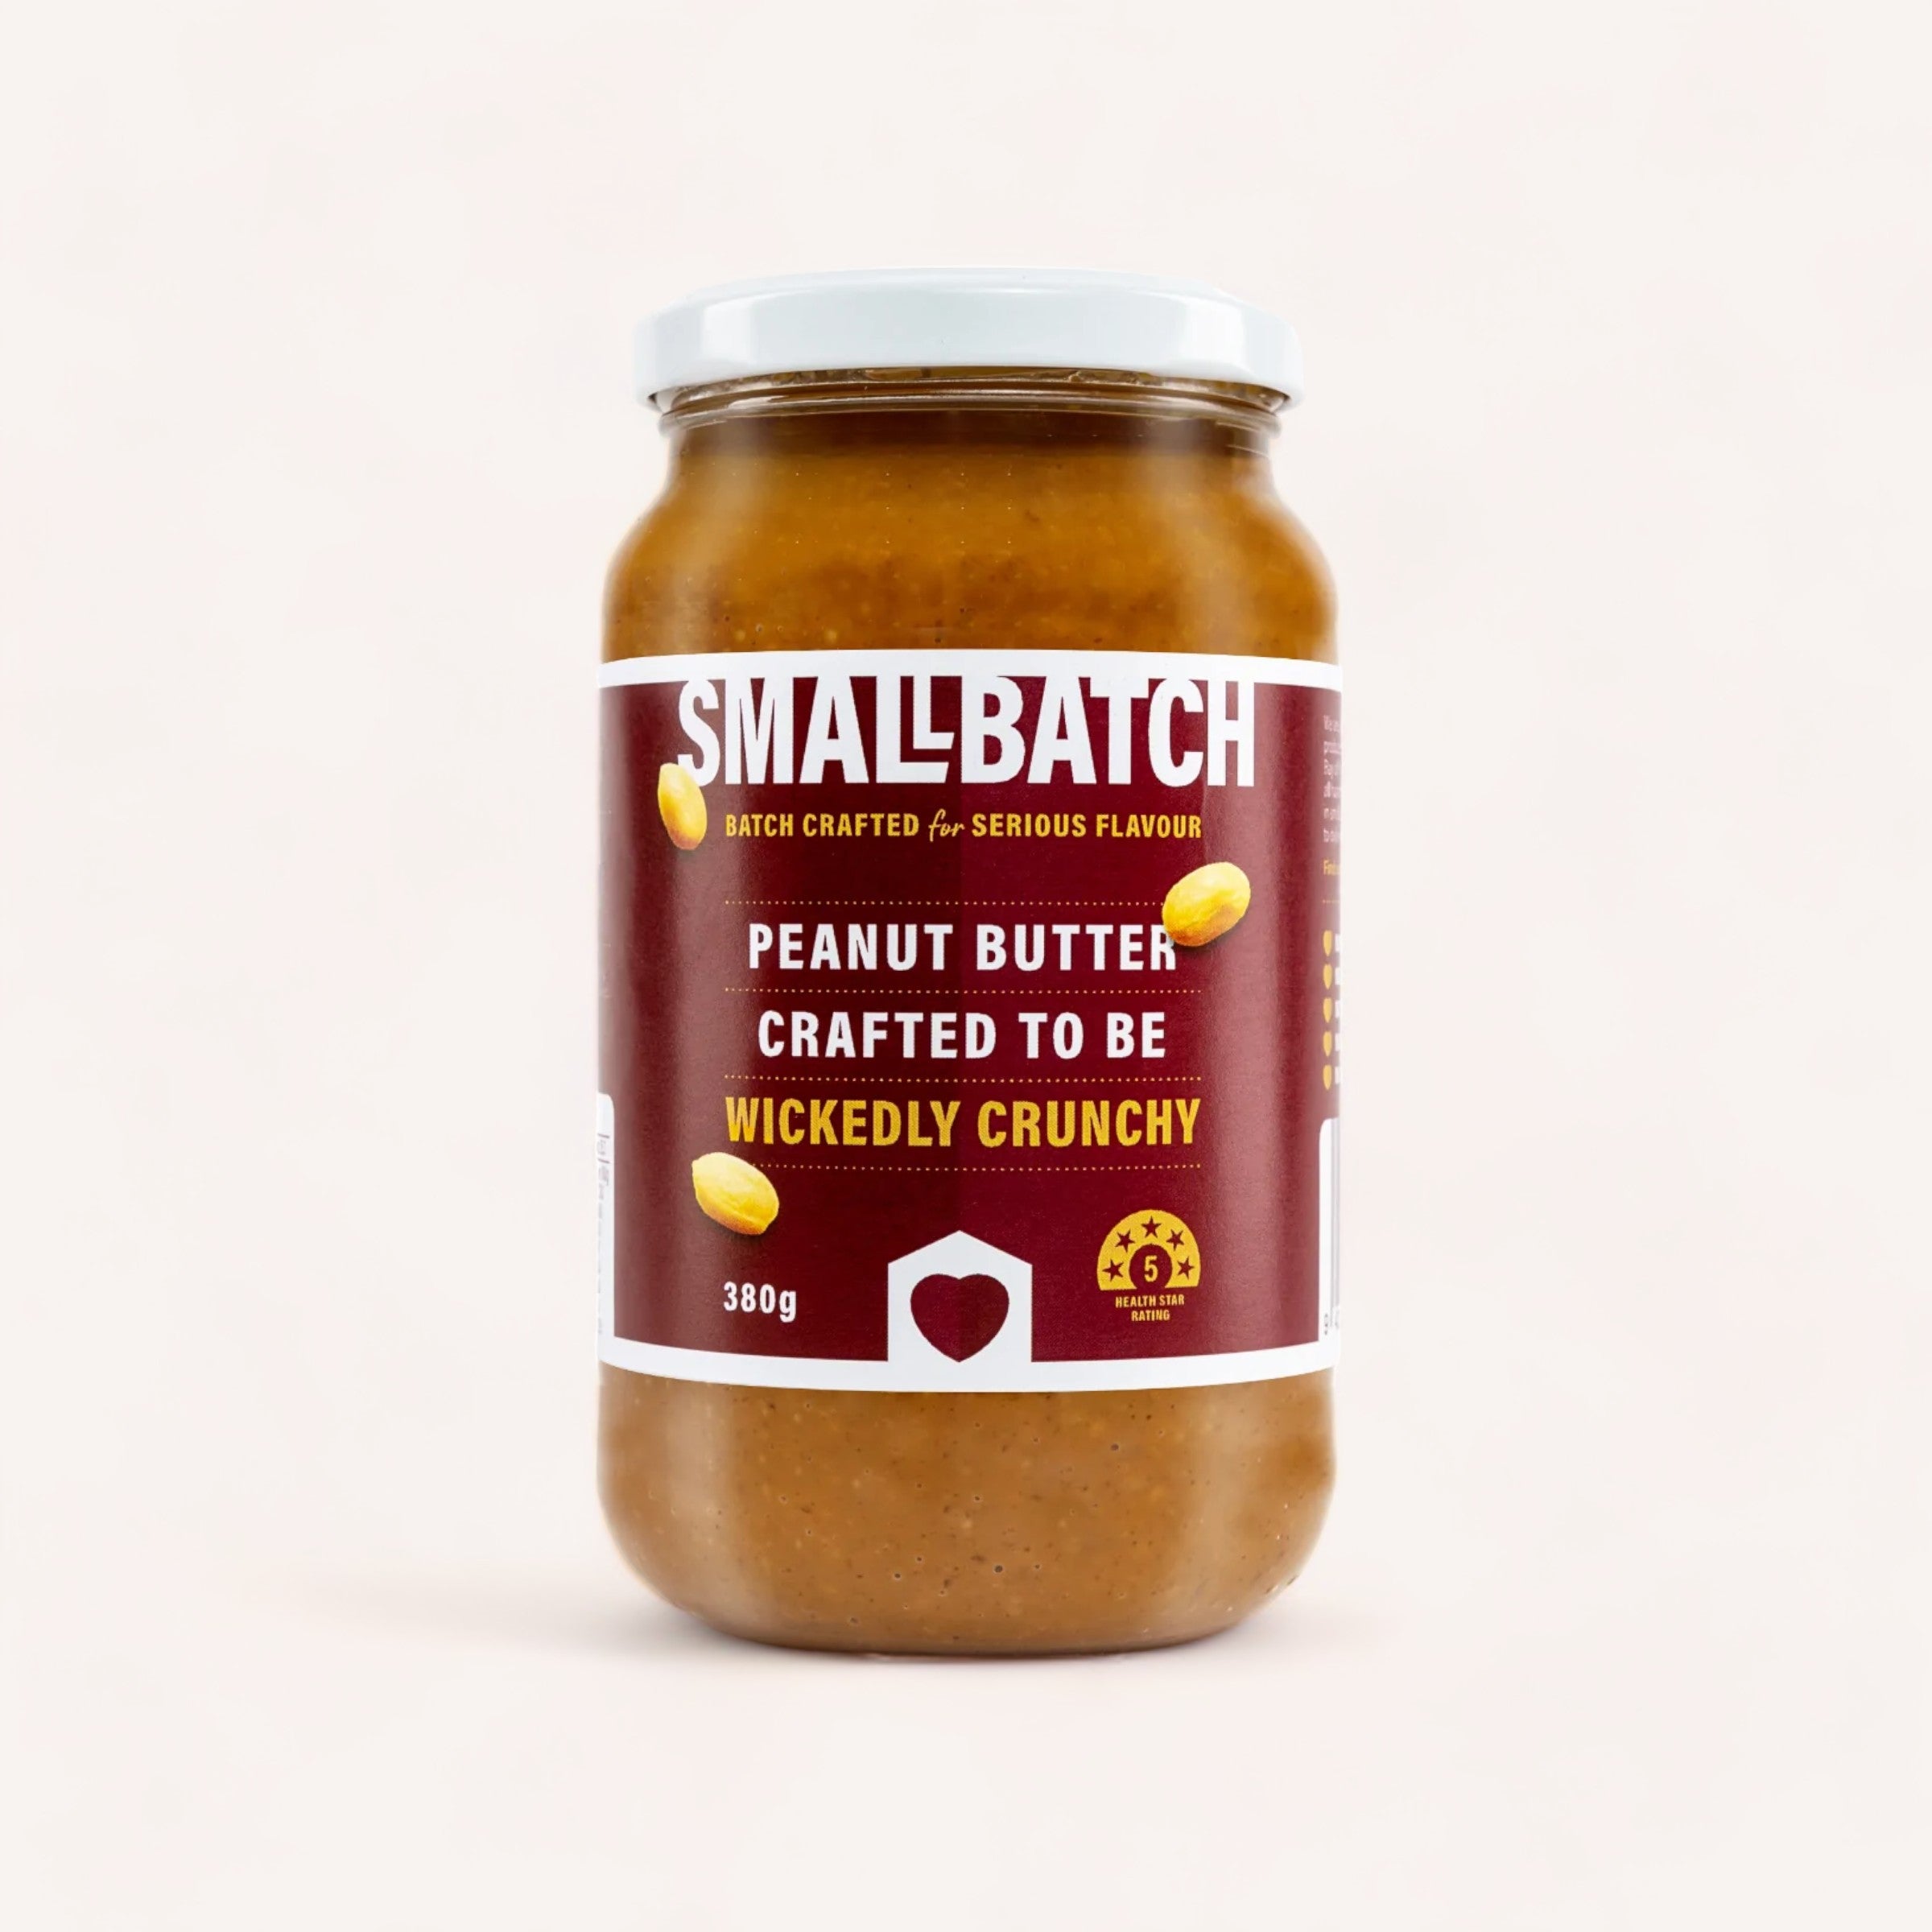 A jar of Spread the Love chocolate hazelnut butter by Smallbatch with a label stating "crafted to be wickedly crunchy" against a neutral background.